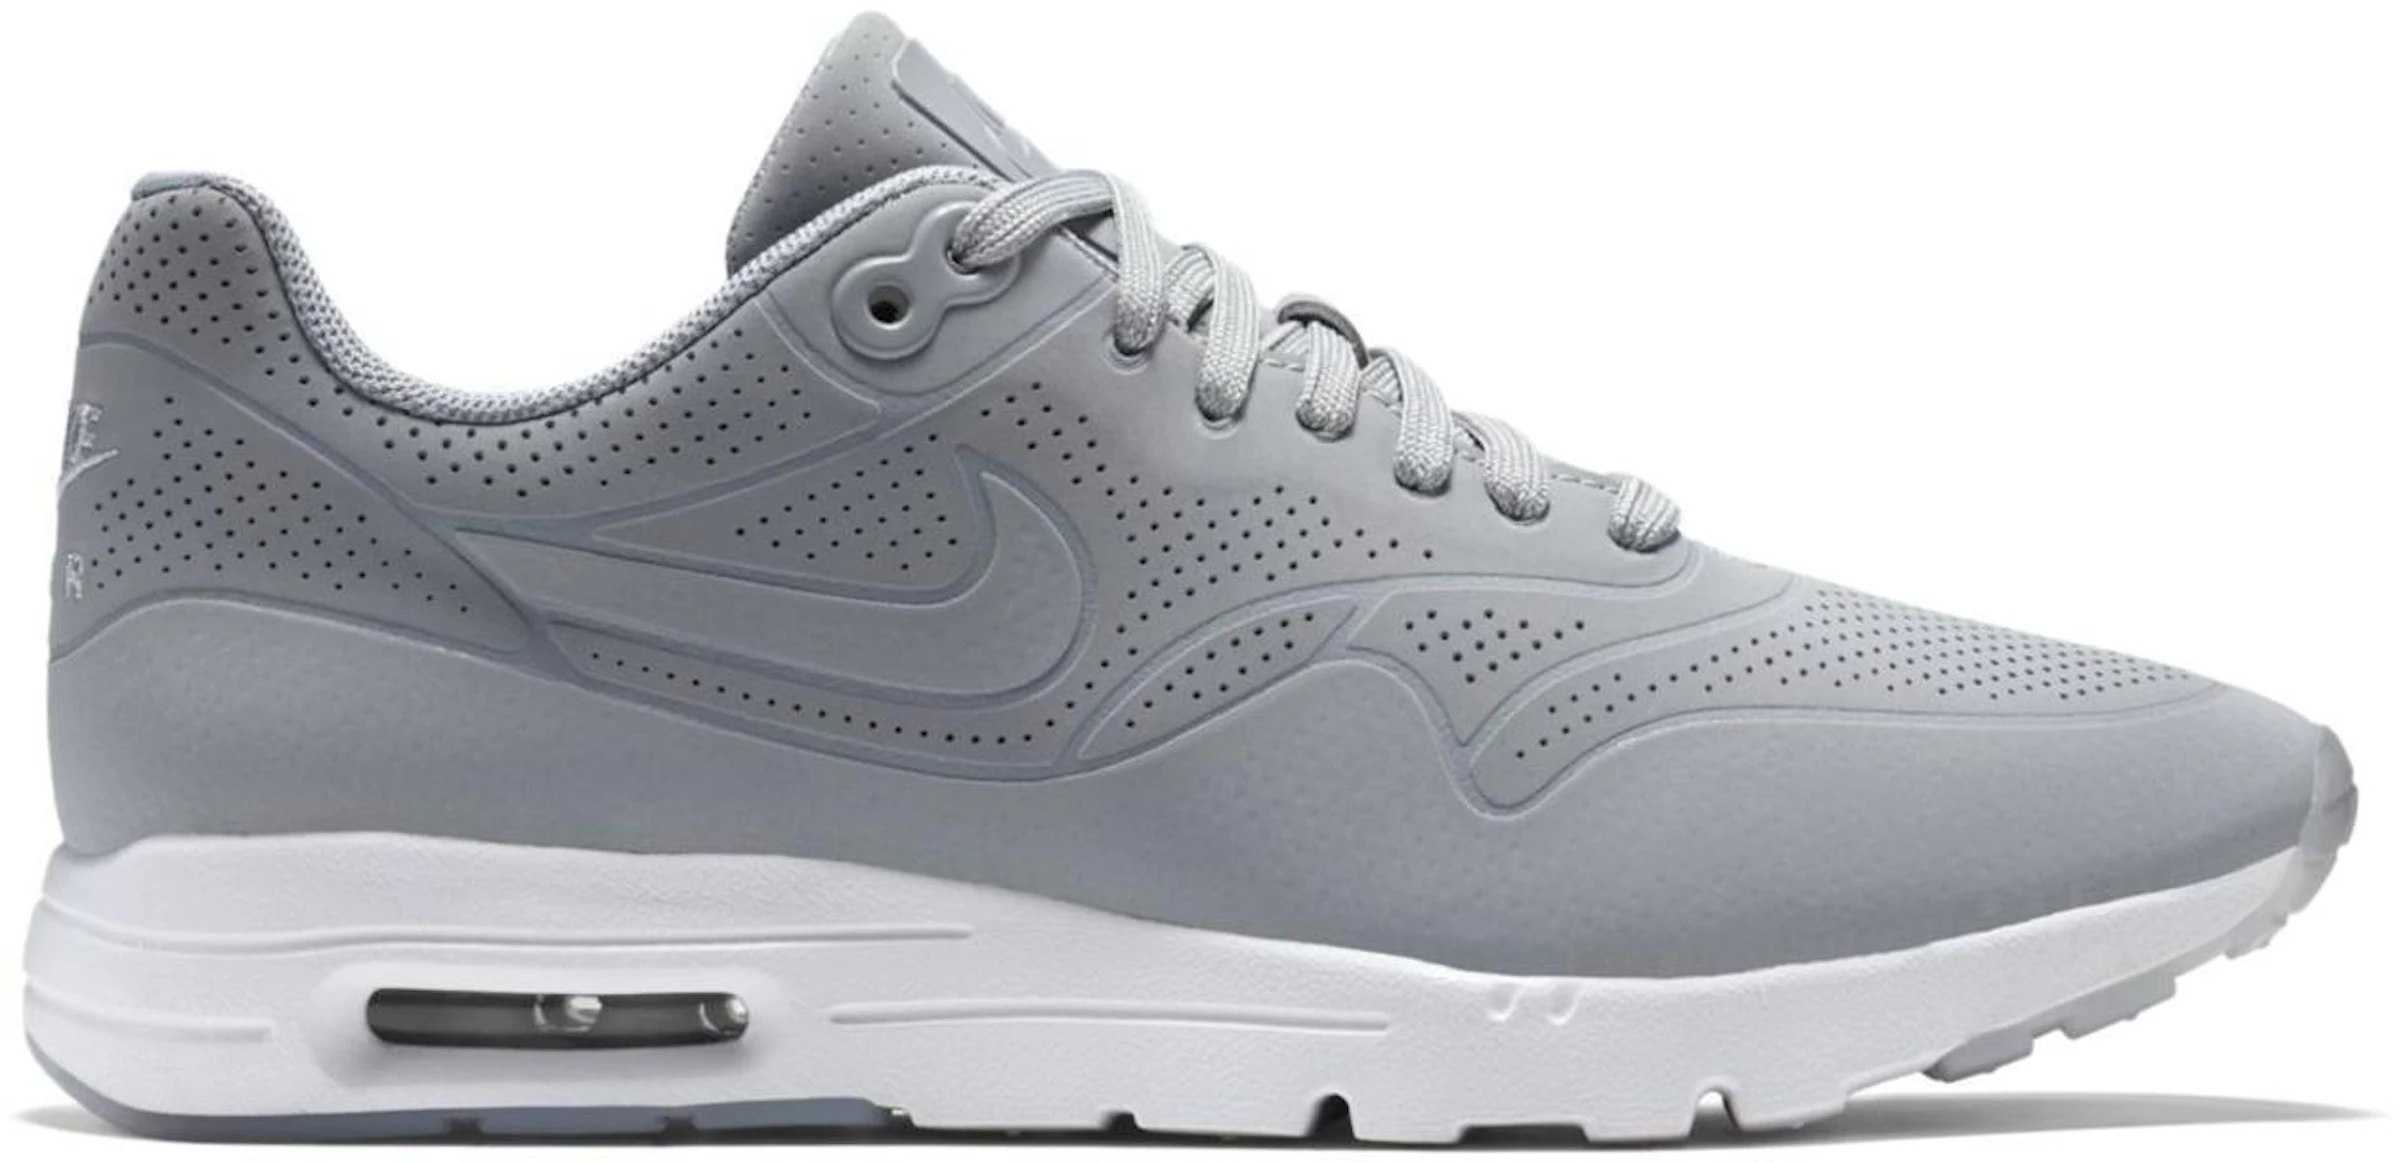 Air Max 1 Ultra Moire Wolf Grey (GS) - 704995-002 - US